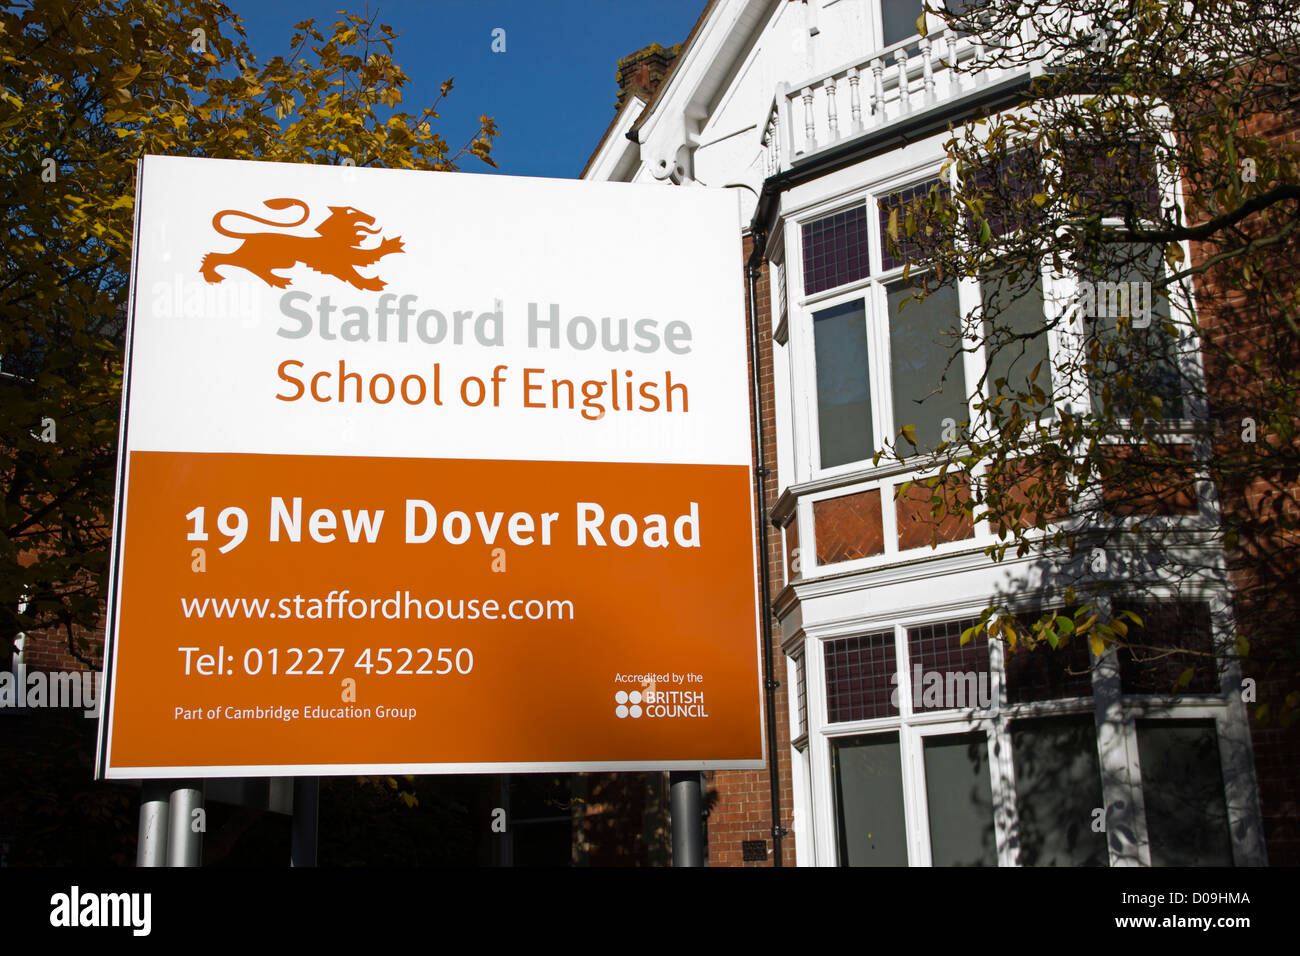 Stafford House School of English Canterbury en Angleterre Banque D'Images